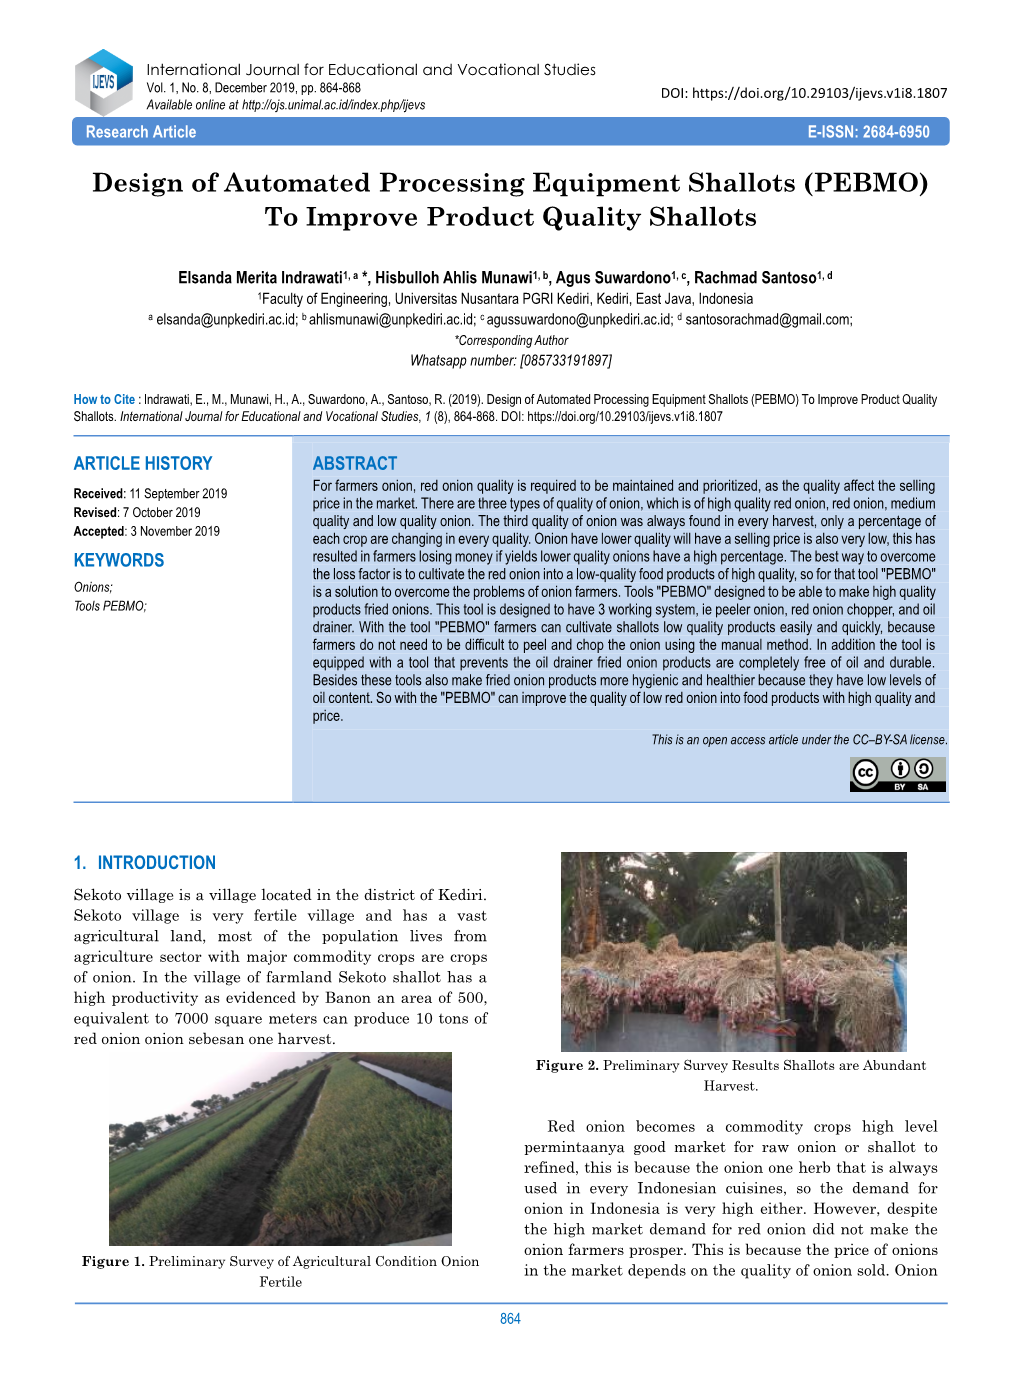 Design of Automated Processing Equipment Shallots (PEBMO) to Improve Product Quality Shallots